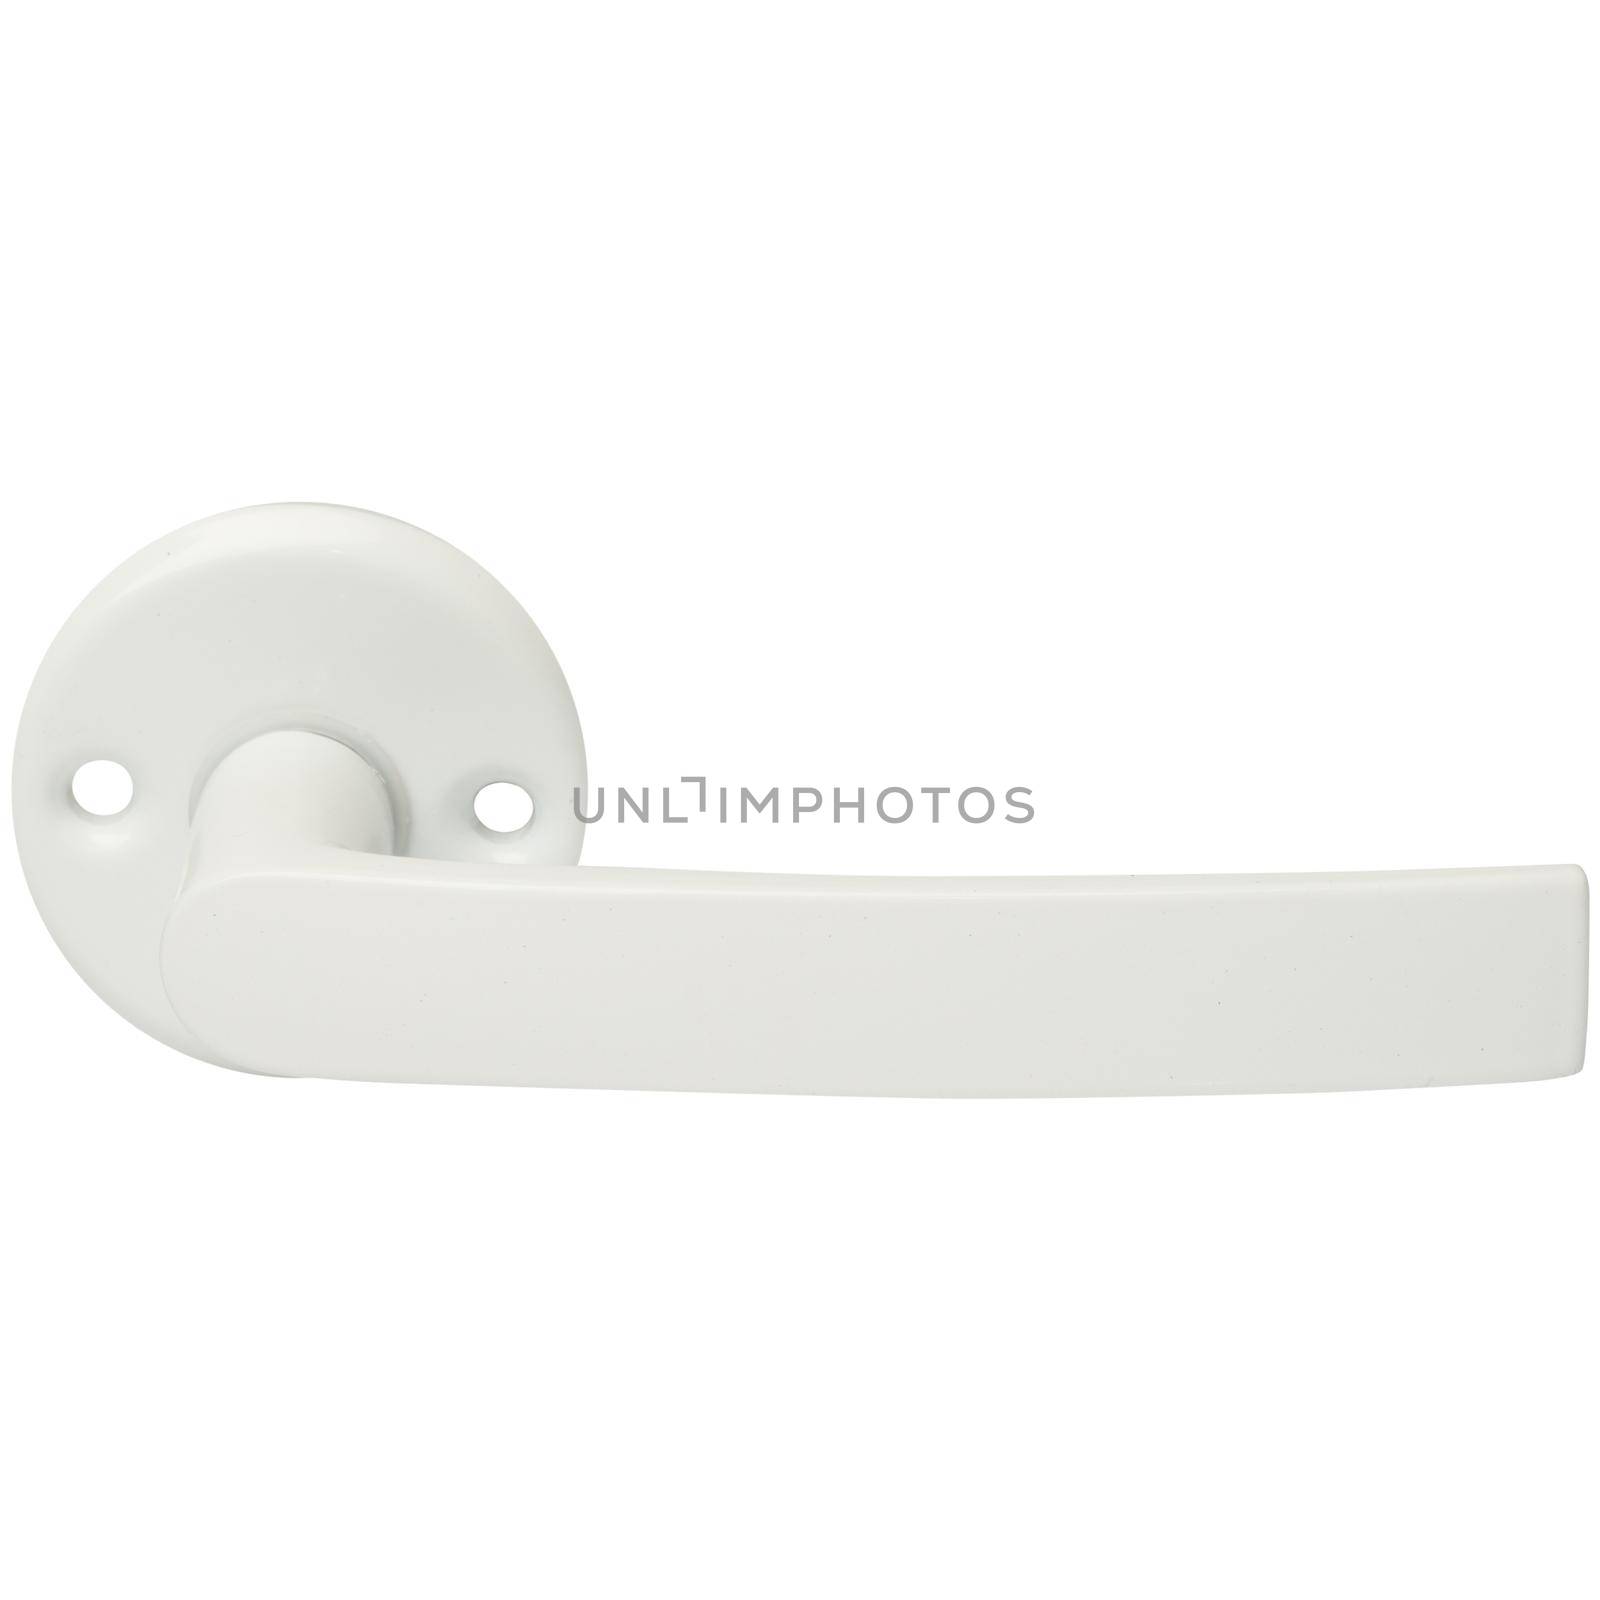 Simple white door handle isolated on plain background